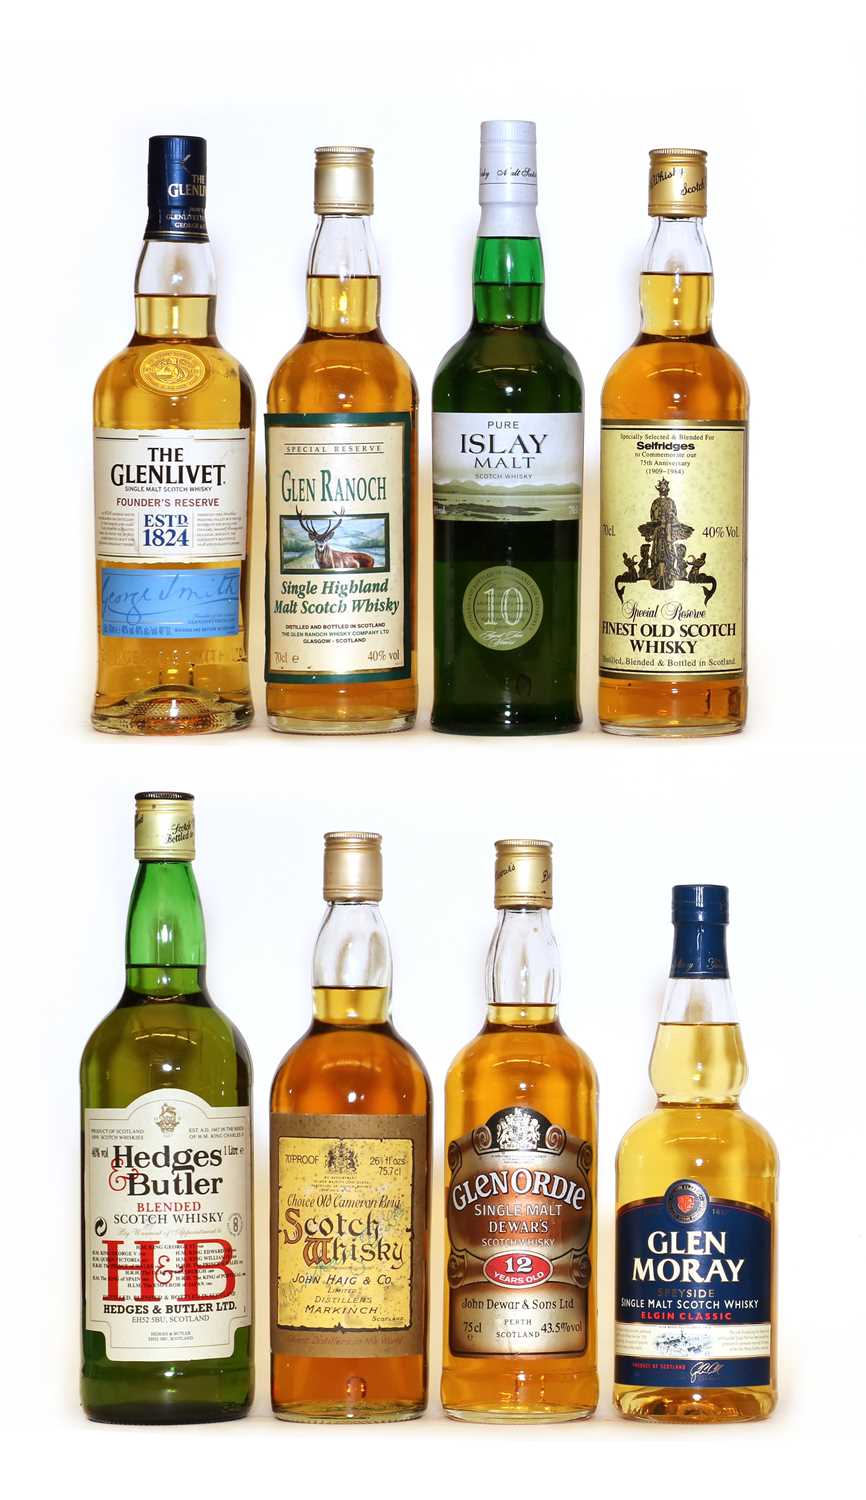 Assorted whisky: Glenordie, 12 Years Old, 1980s bottling, one bottle and seven various others